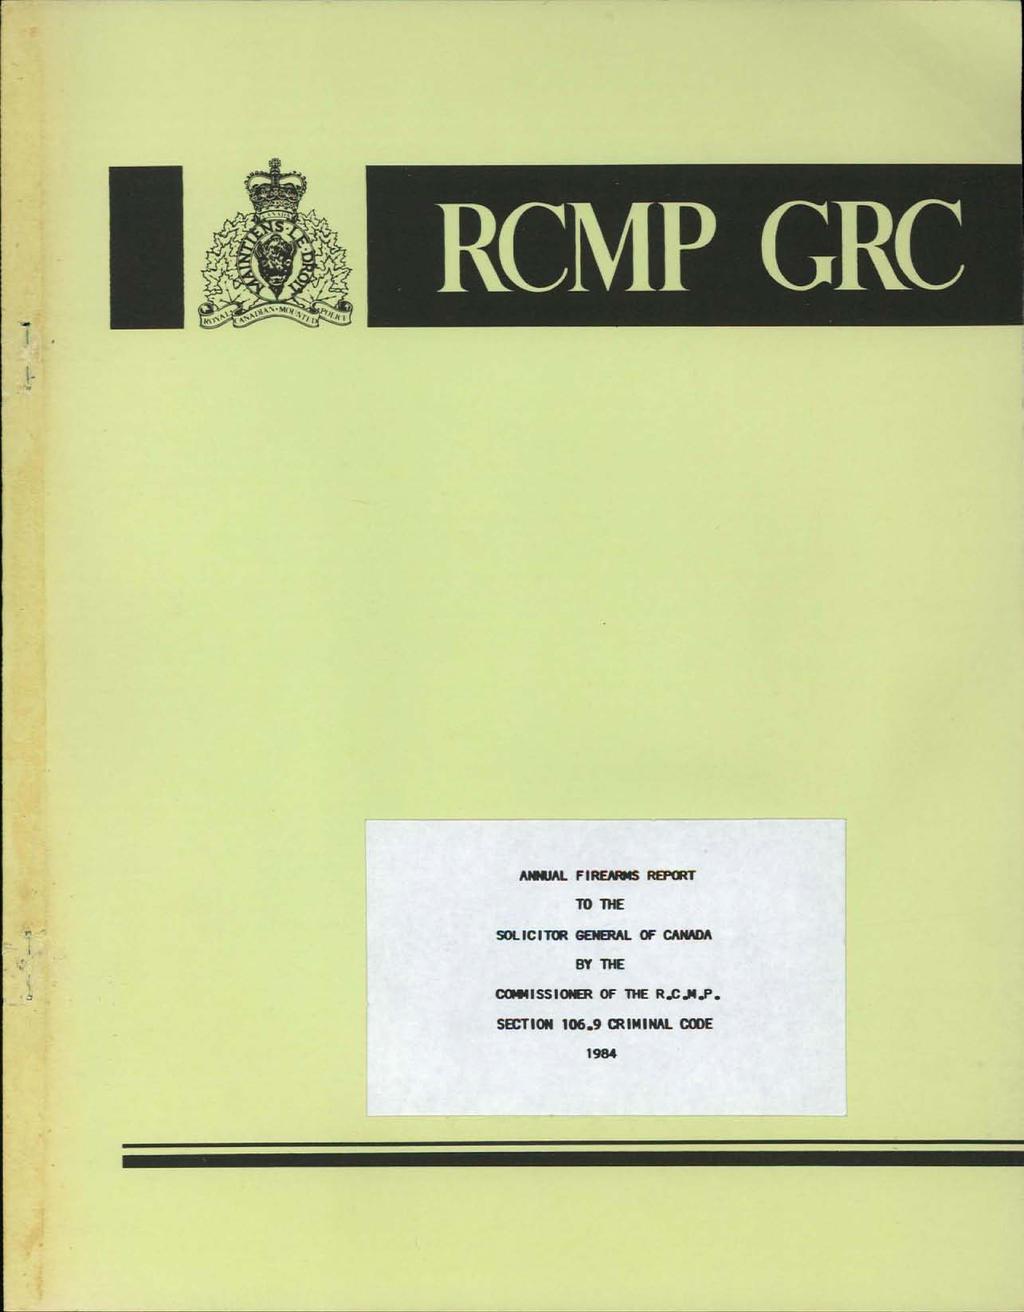 RCMP GRC ANNUAL FIREARMS REPORT TO THE SOLICITOR GENERAL OF CANADA